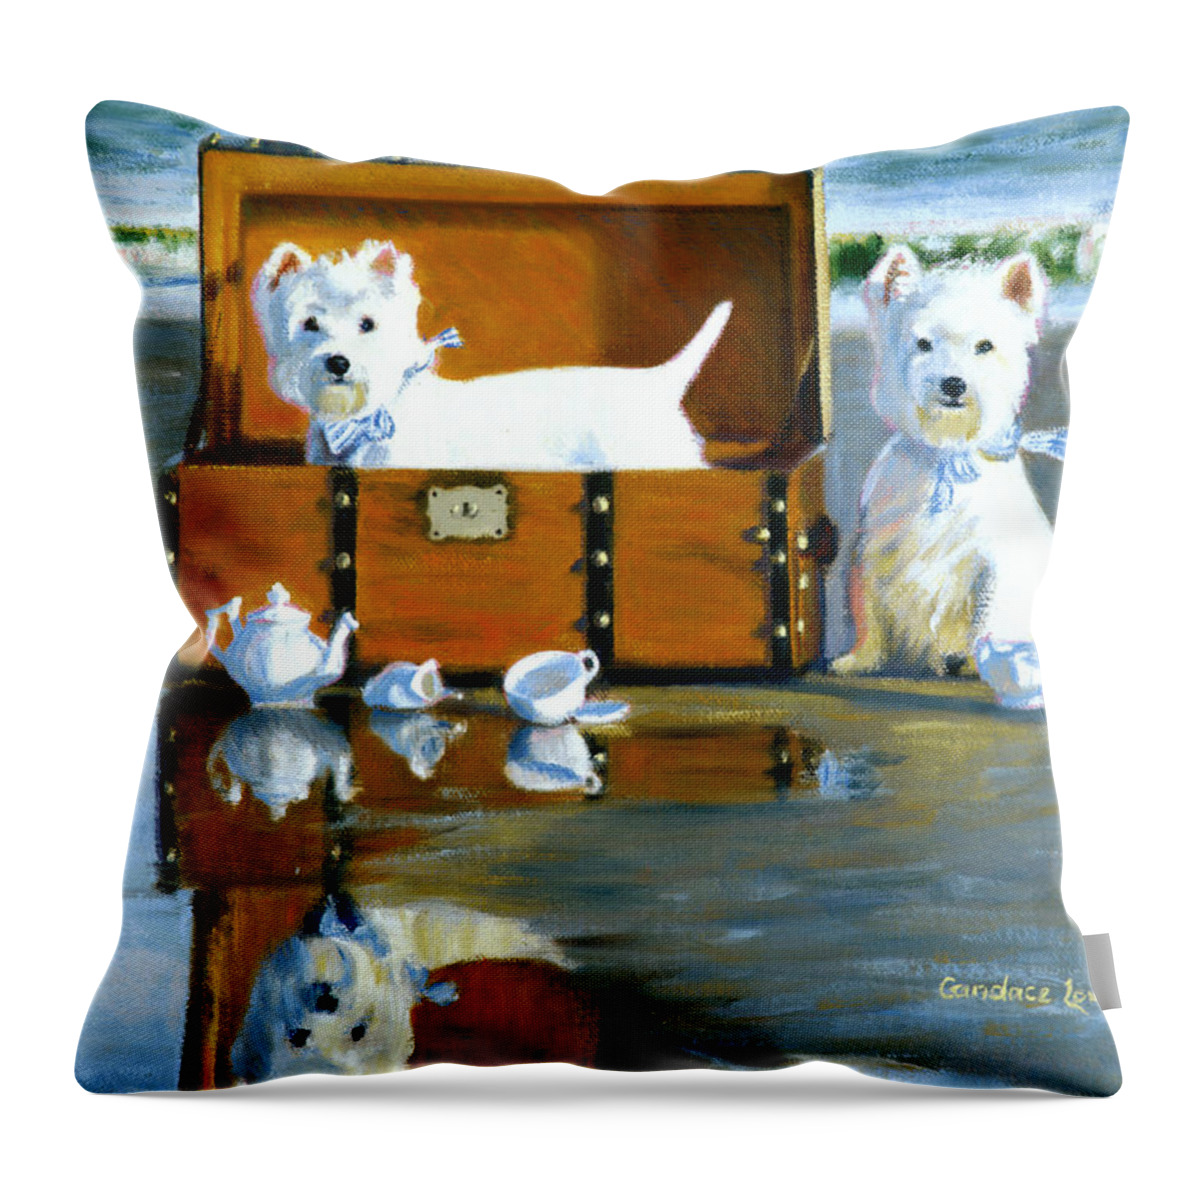 White Dogs Throw Pillow featuring the painting Where are the Cookies by Candace Lovely